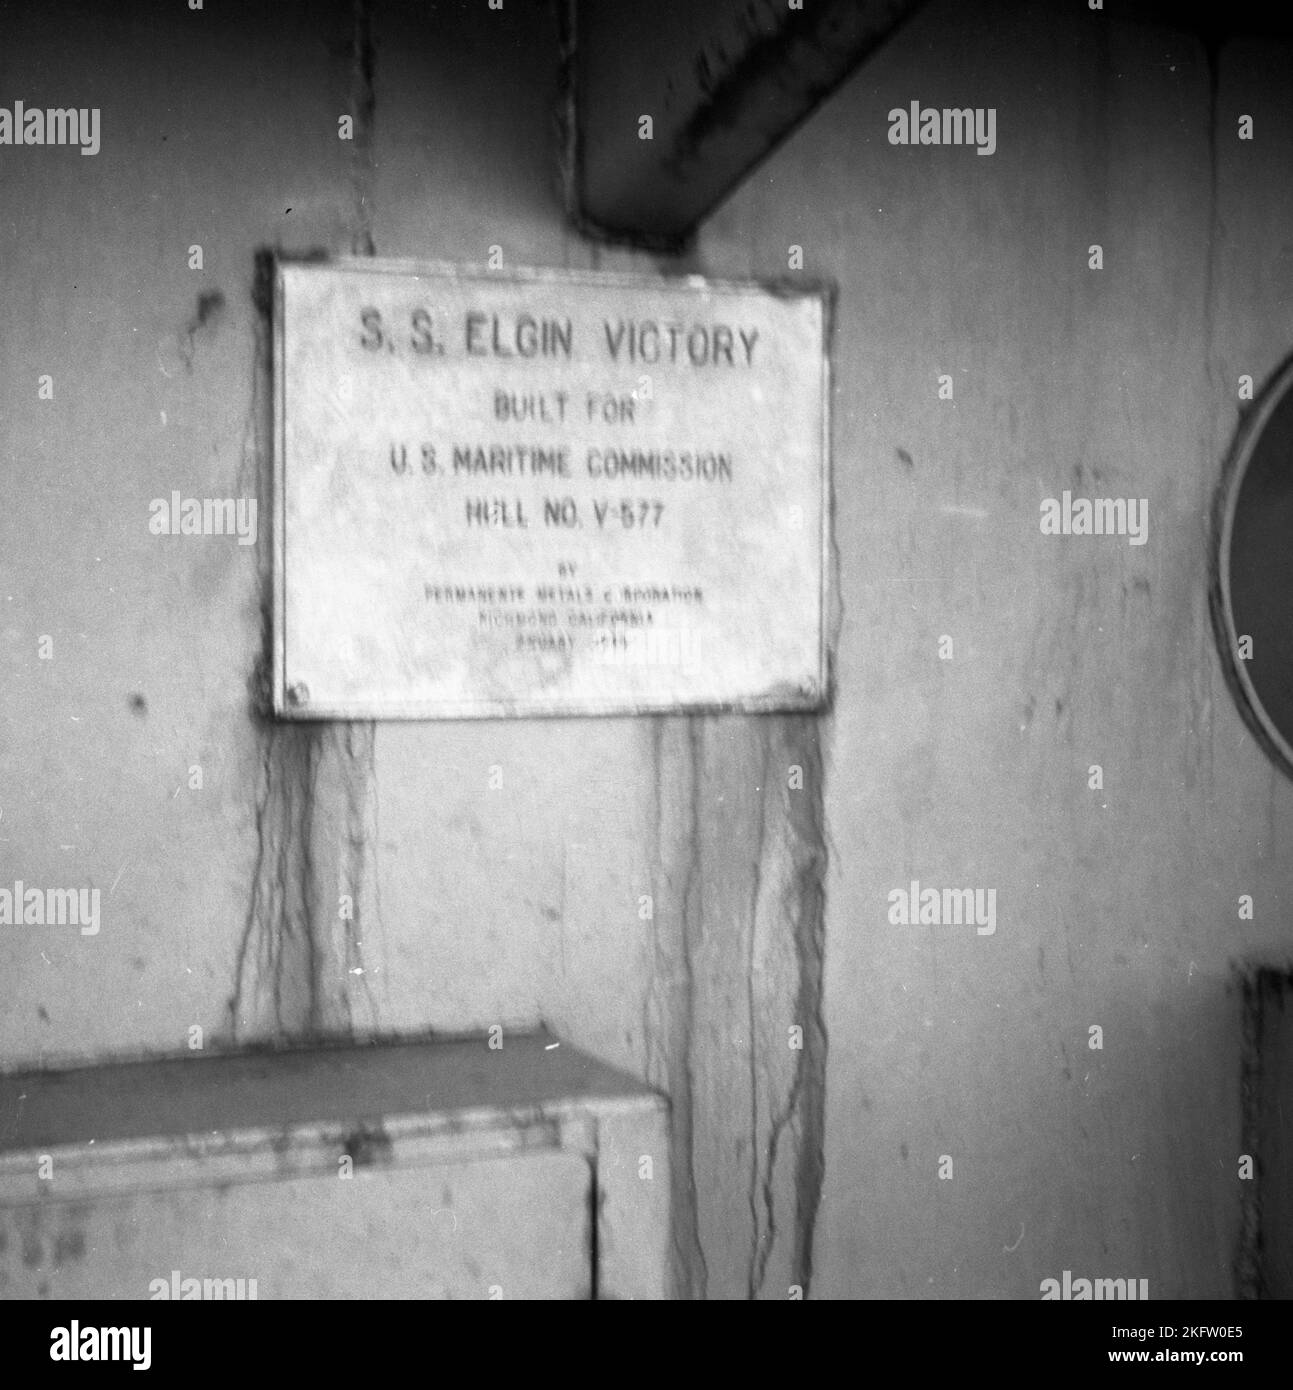 Nameplate. United States Army veterans coming home on the Elgin Victory ship at the conclusion of World War II. SS Elgin Victory, a type VC2-S-AP2 Victory ship built by Permanente Metals Stock Photo